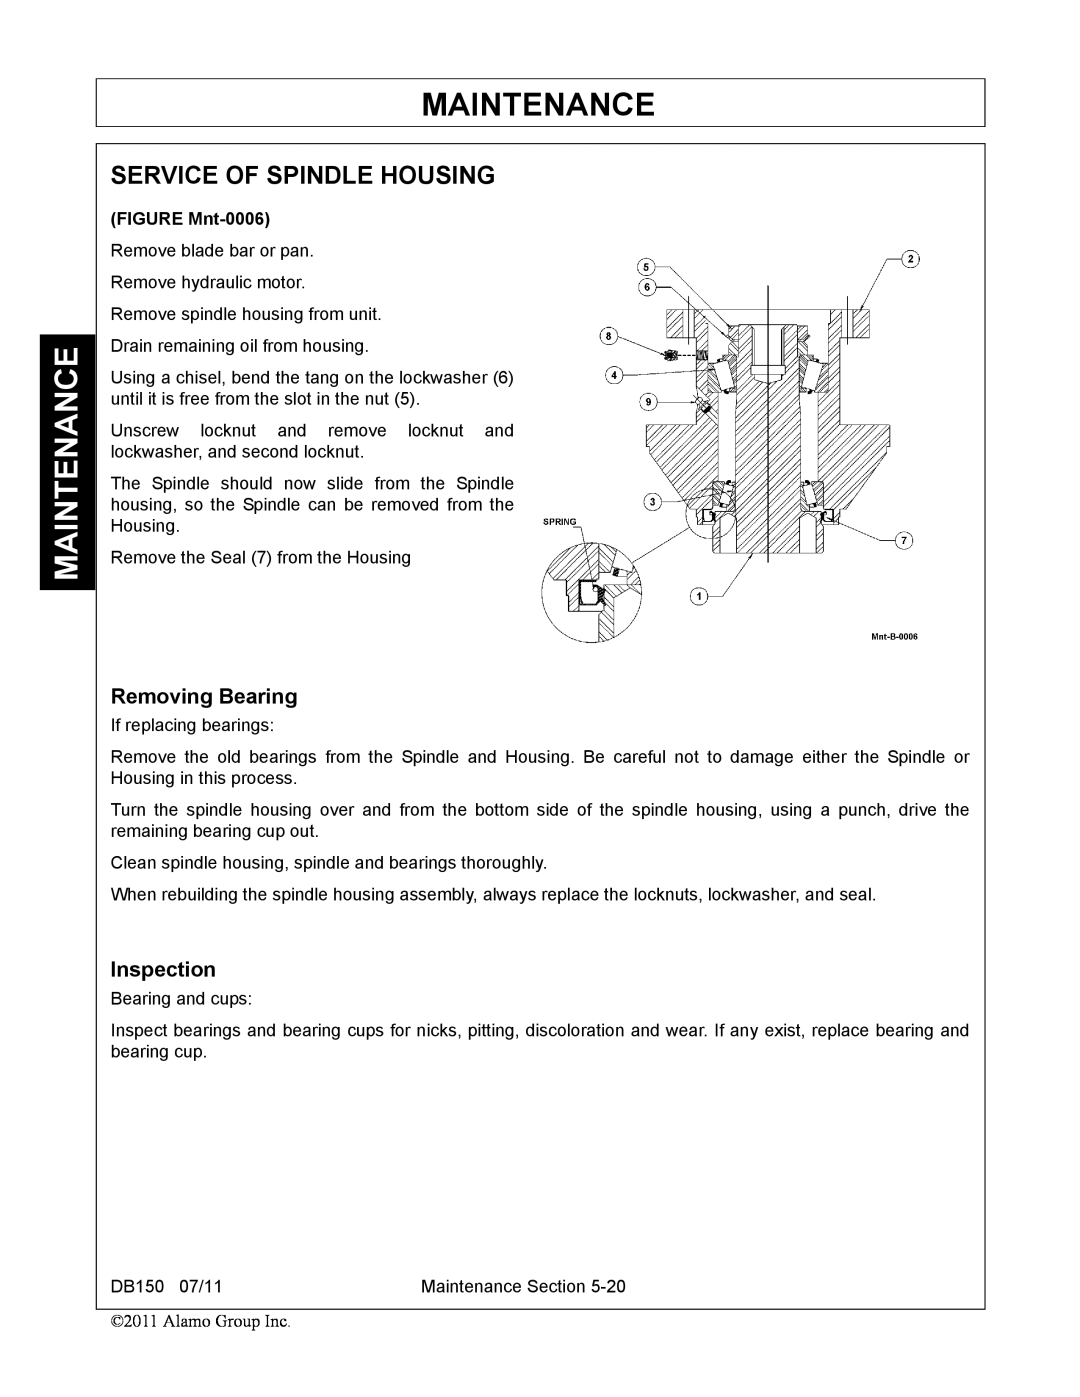 Rhino Mounts DB150 manual Service Of Spindle Housing, Maintenance, Removing Bearing, Inspection, FIGURE Mnt-0006 